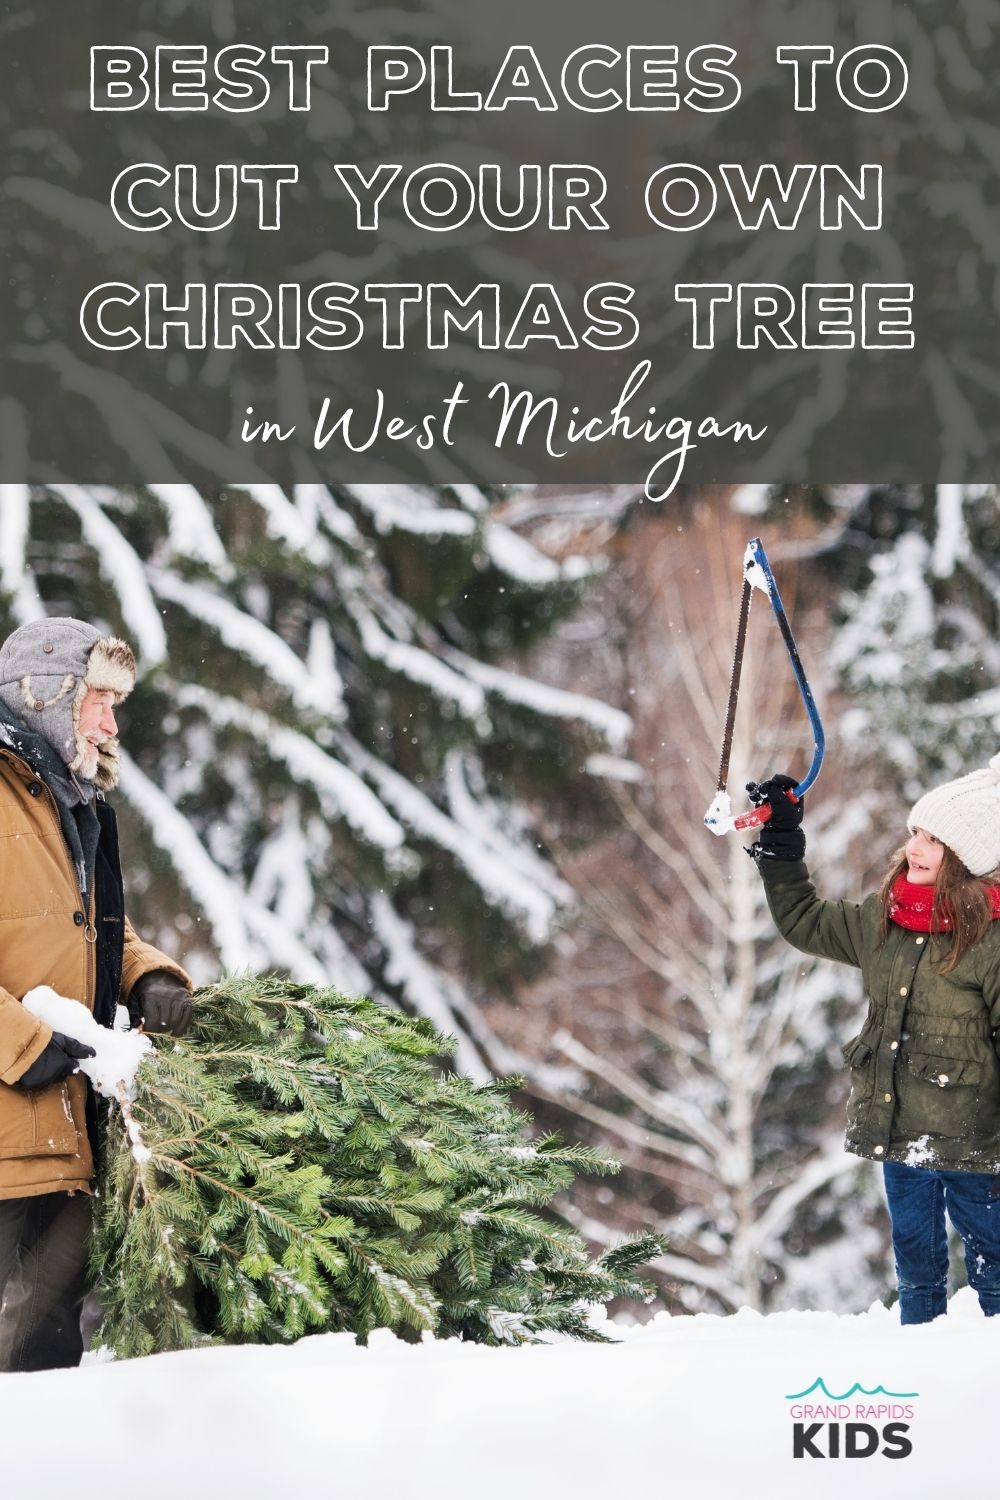 15+ Unforgettable Christmas Tree Farms in West Michigan that Let You Cut Your Own Christmas Tree